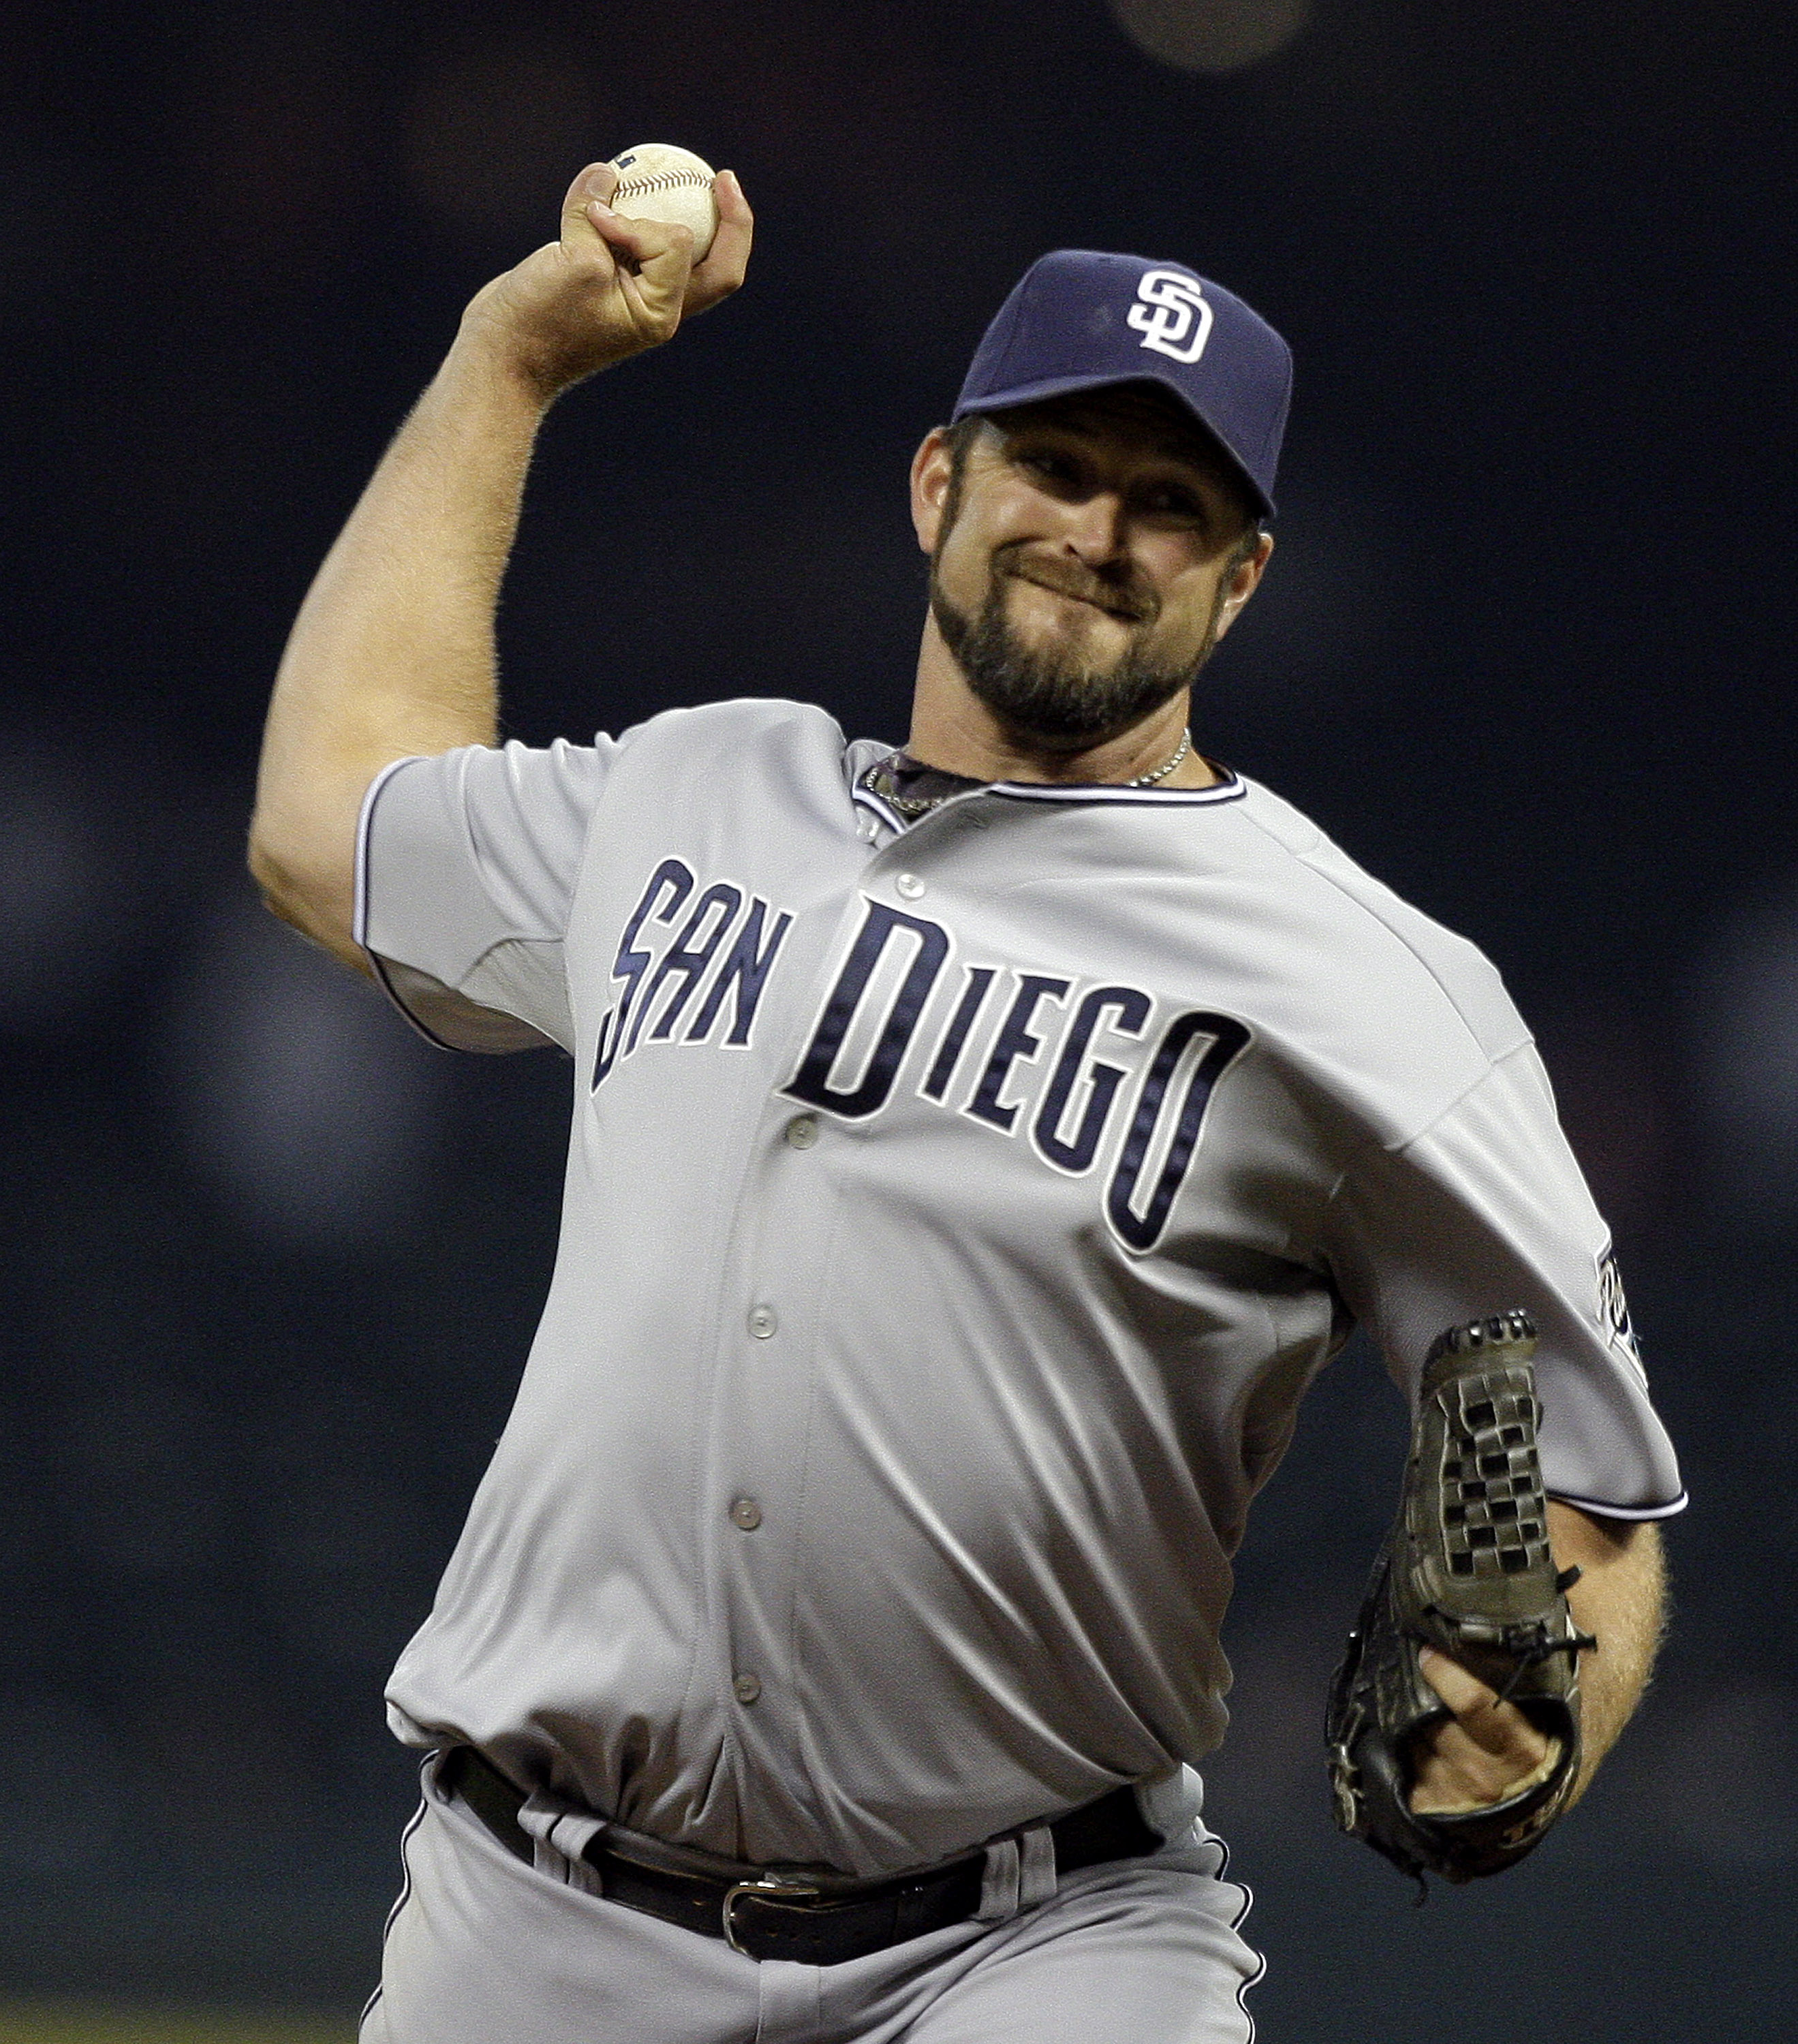 This great Padres pitching is being wasted by their horrendous offense.